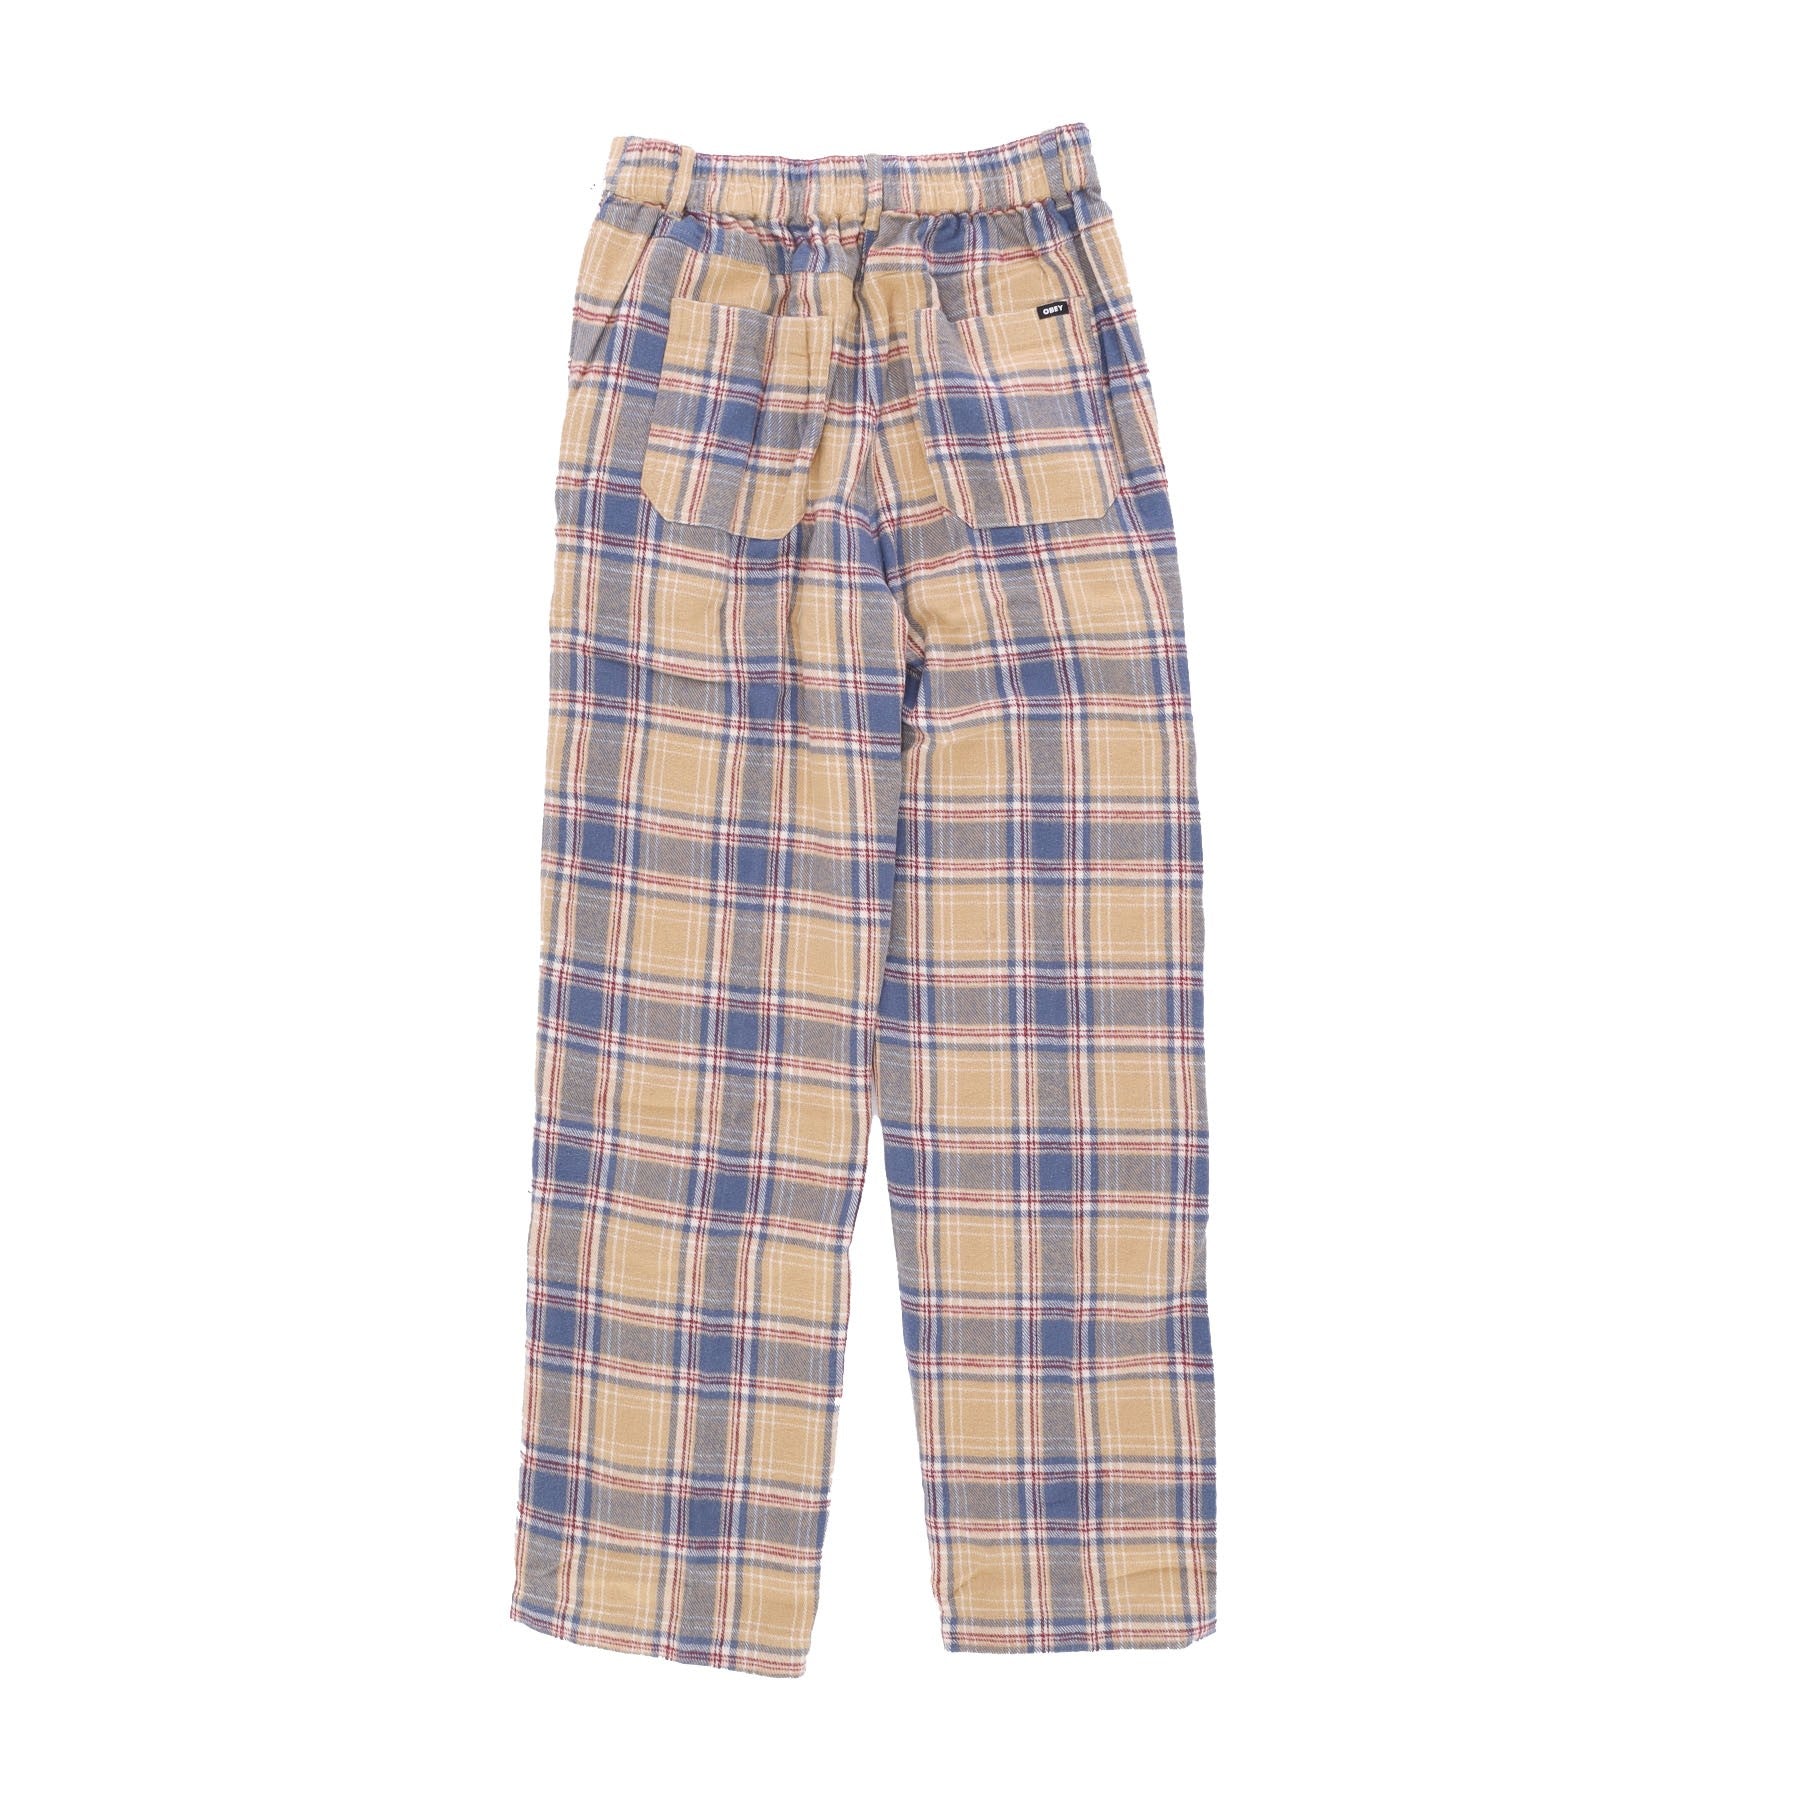 Obey, Pantalone Lungo Donna Pia Flannel Pant, 